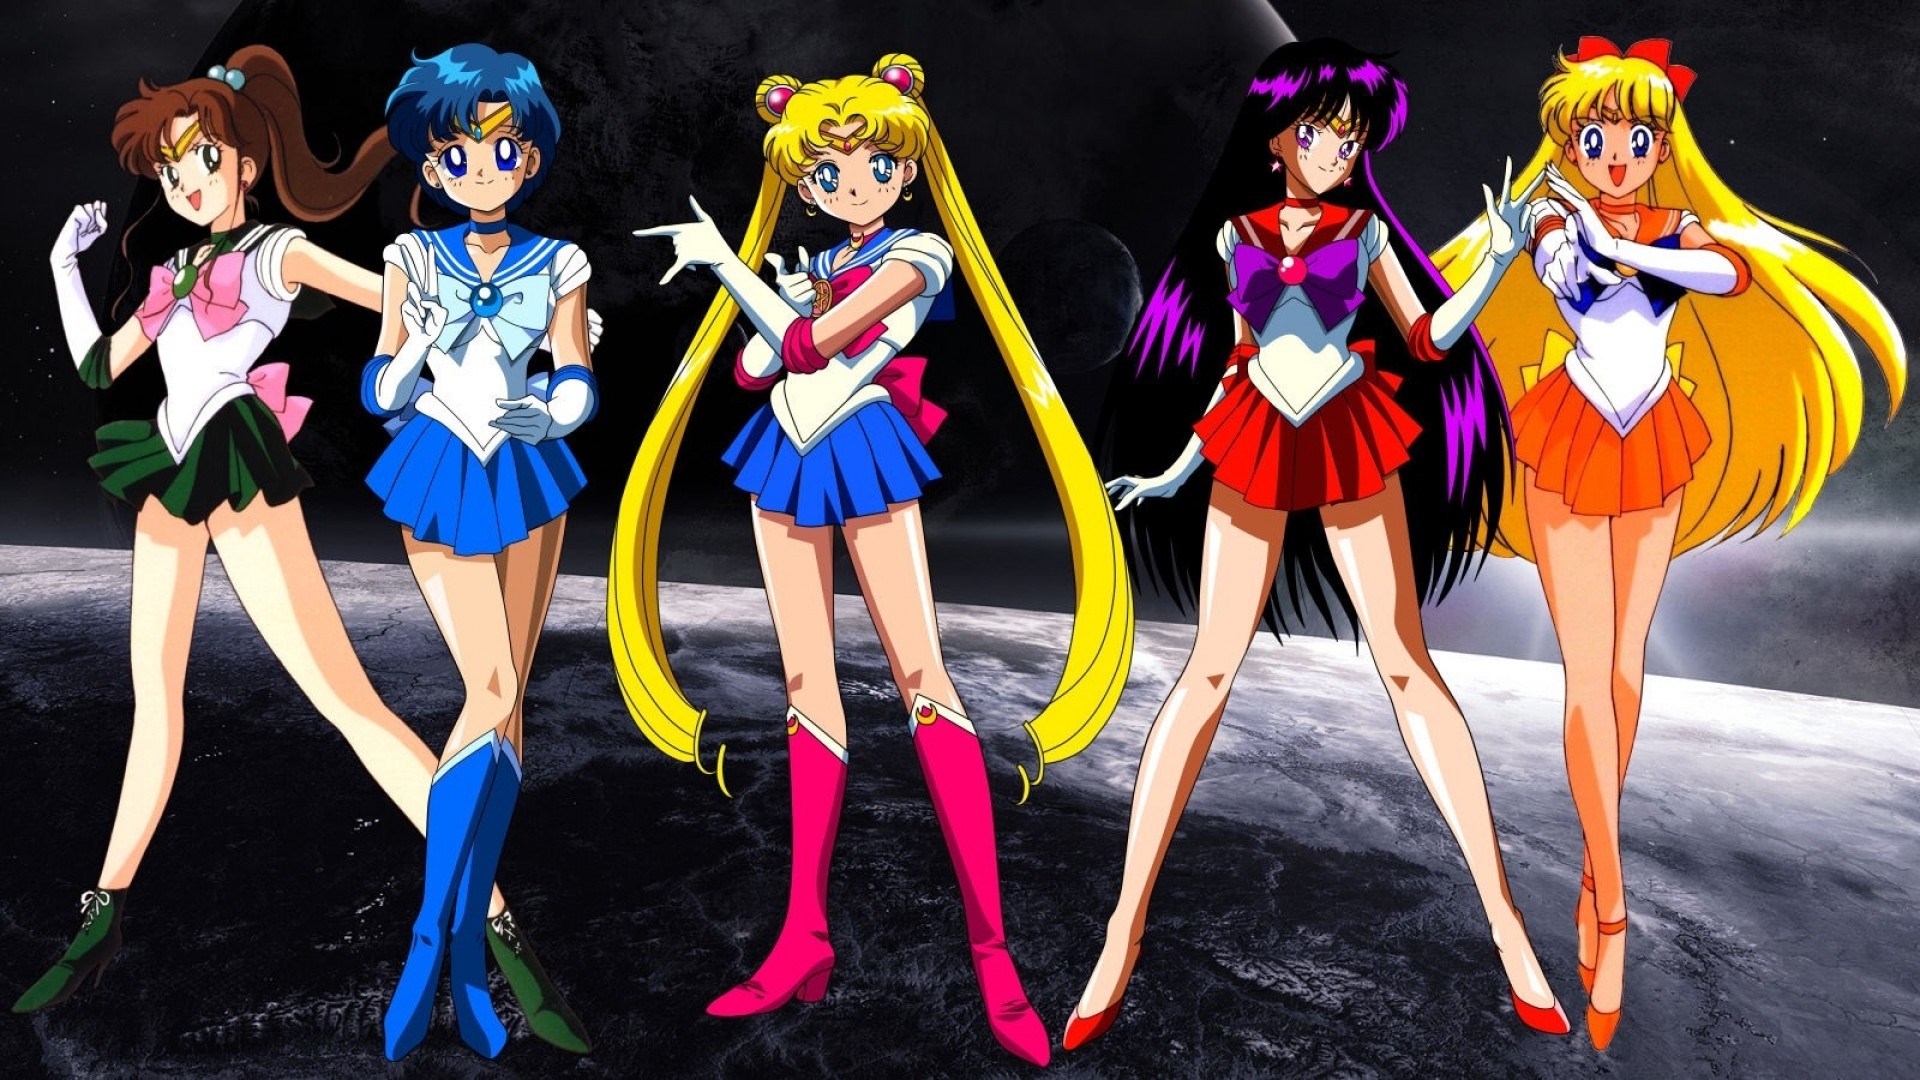 Sailor Moon 164. How to set wallpaper on your desktop Click the download link from above and set the wallpaper on the desktop from your OS